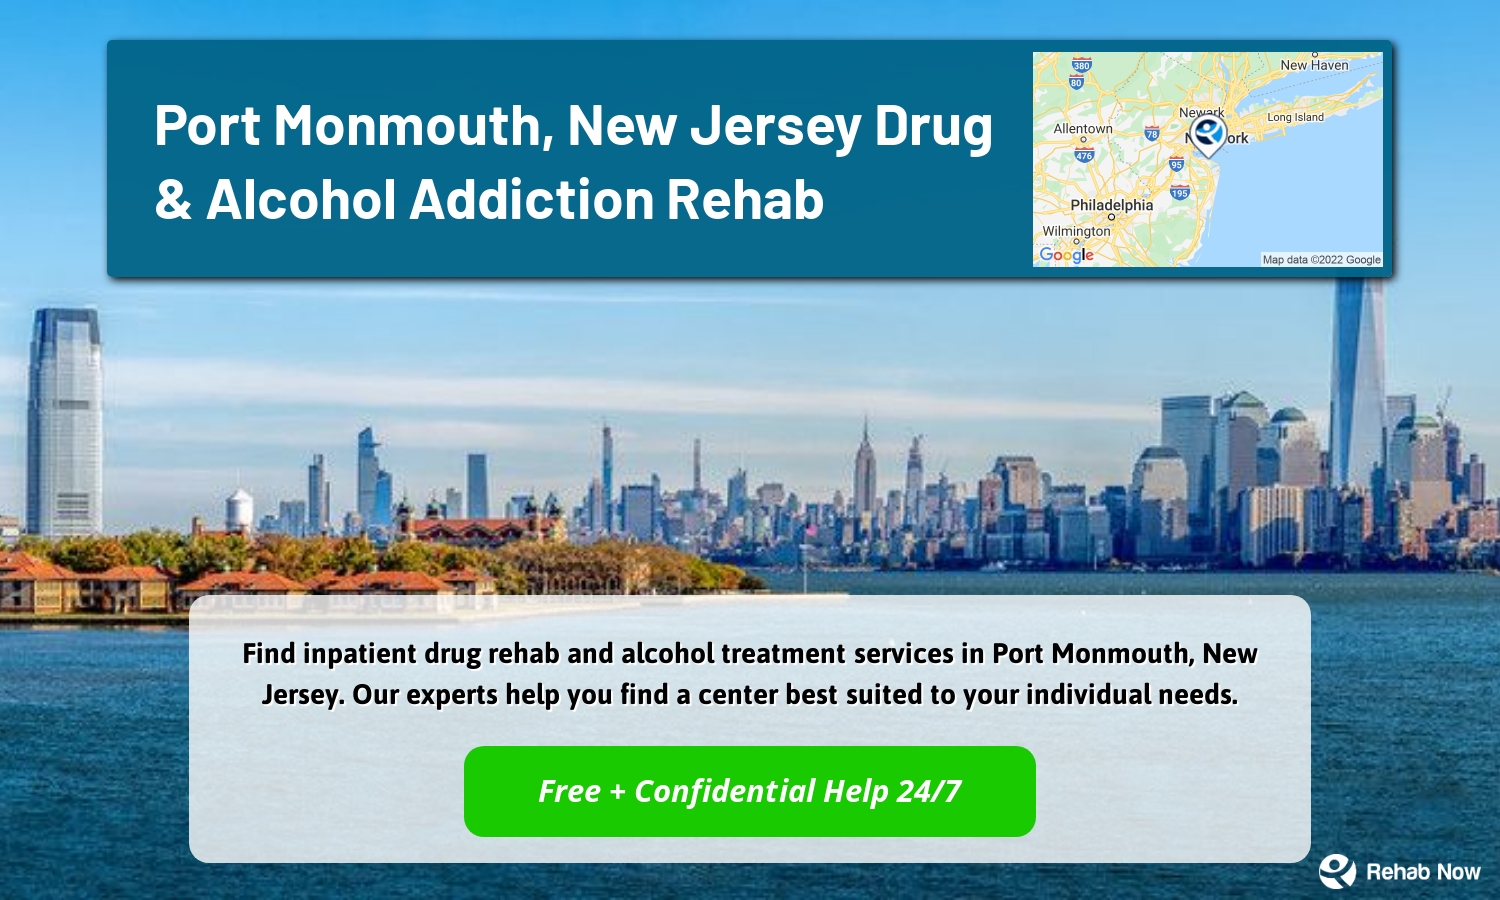 Find inpatient drug rehab and alcohol treatment services in Port Monmouth, New Jersey. Our experts help you find a center best suited to your individual needs.